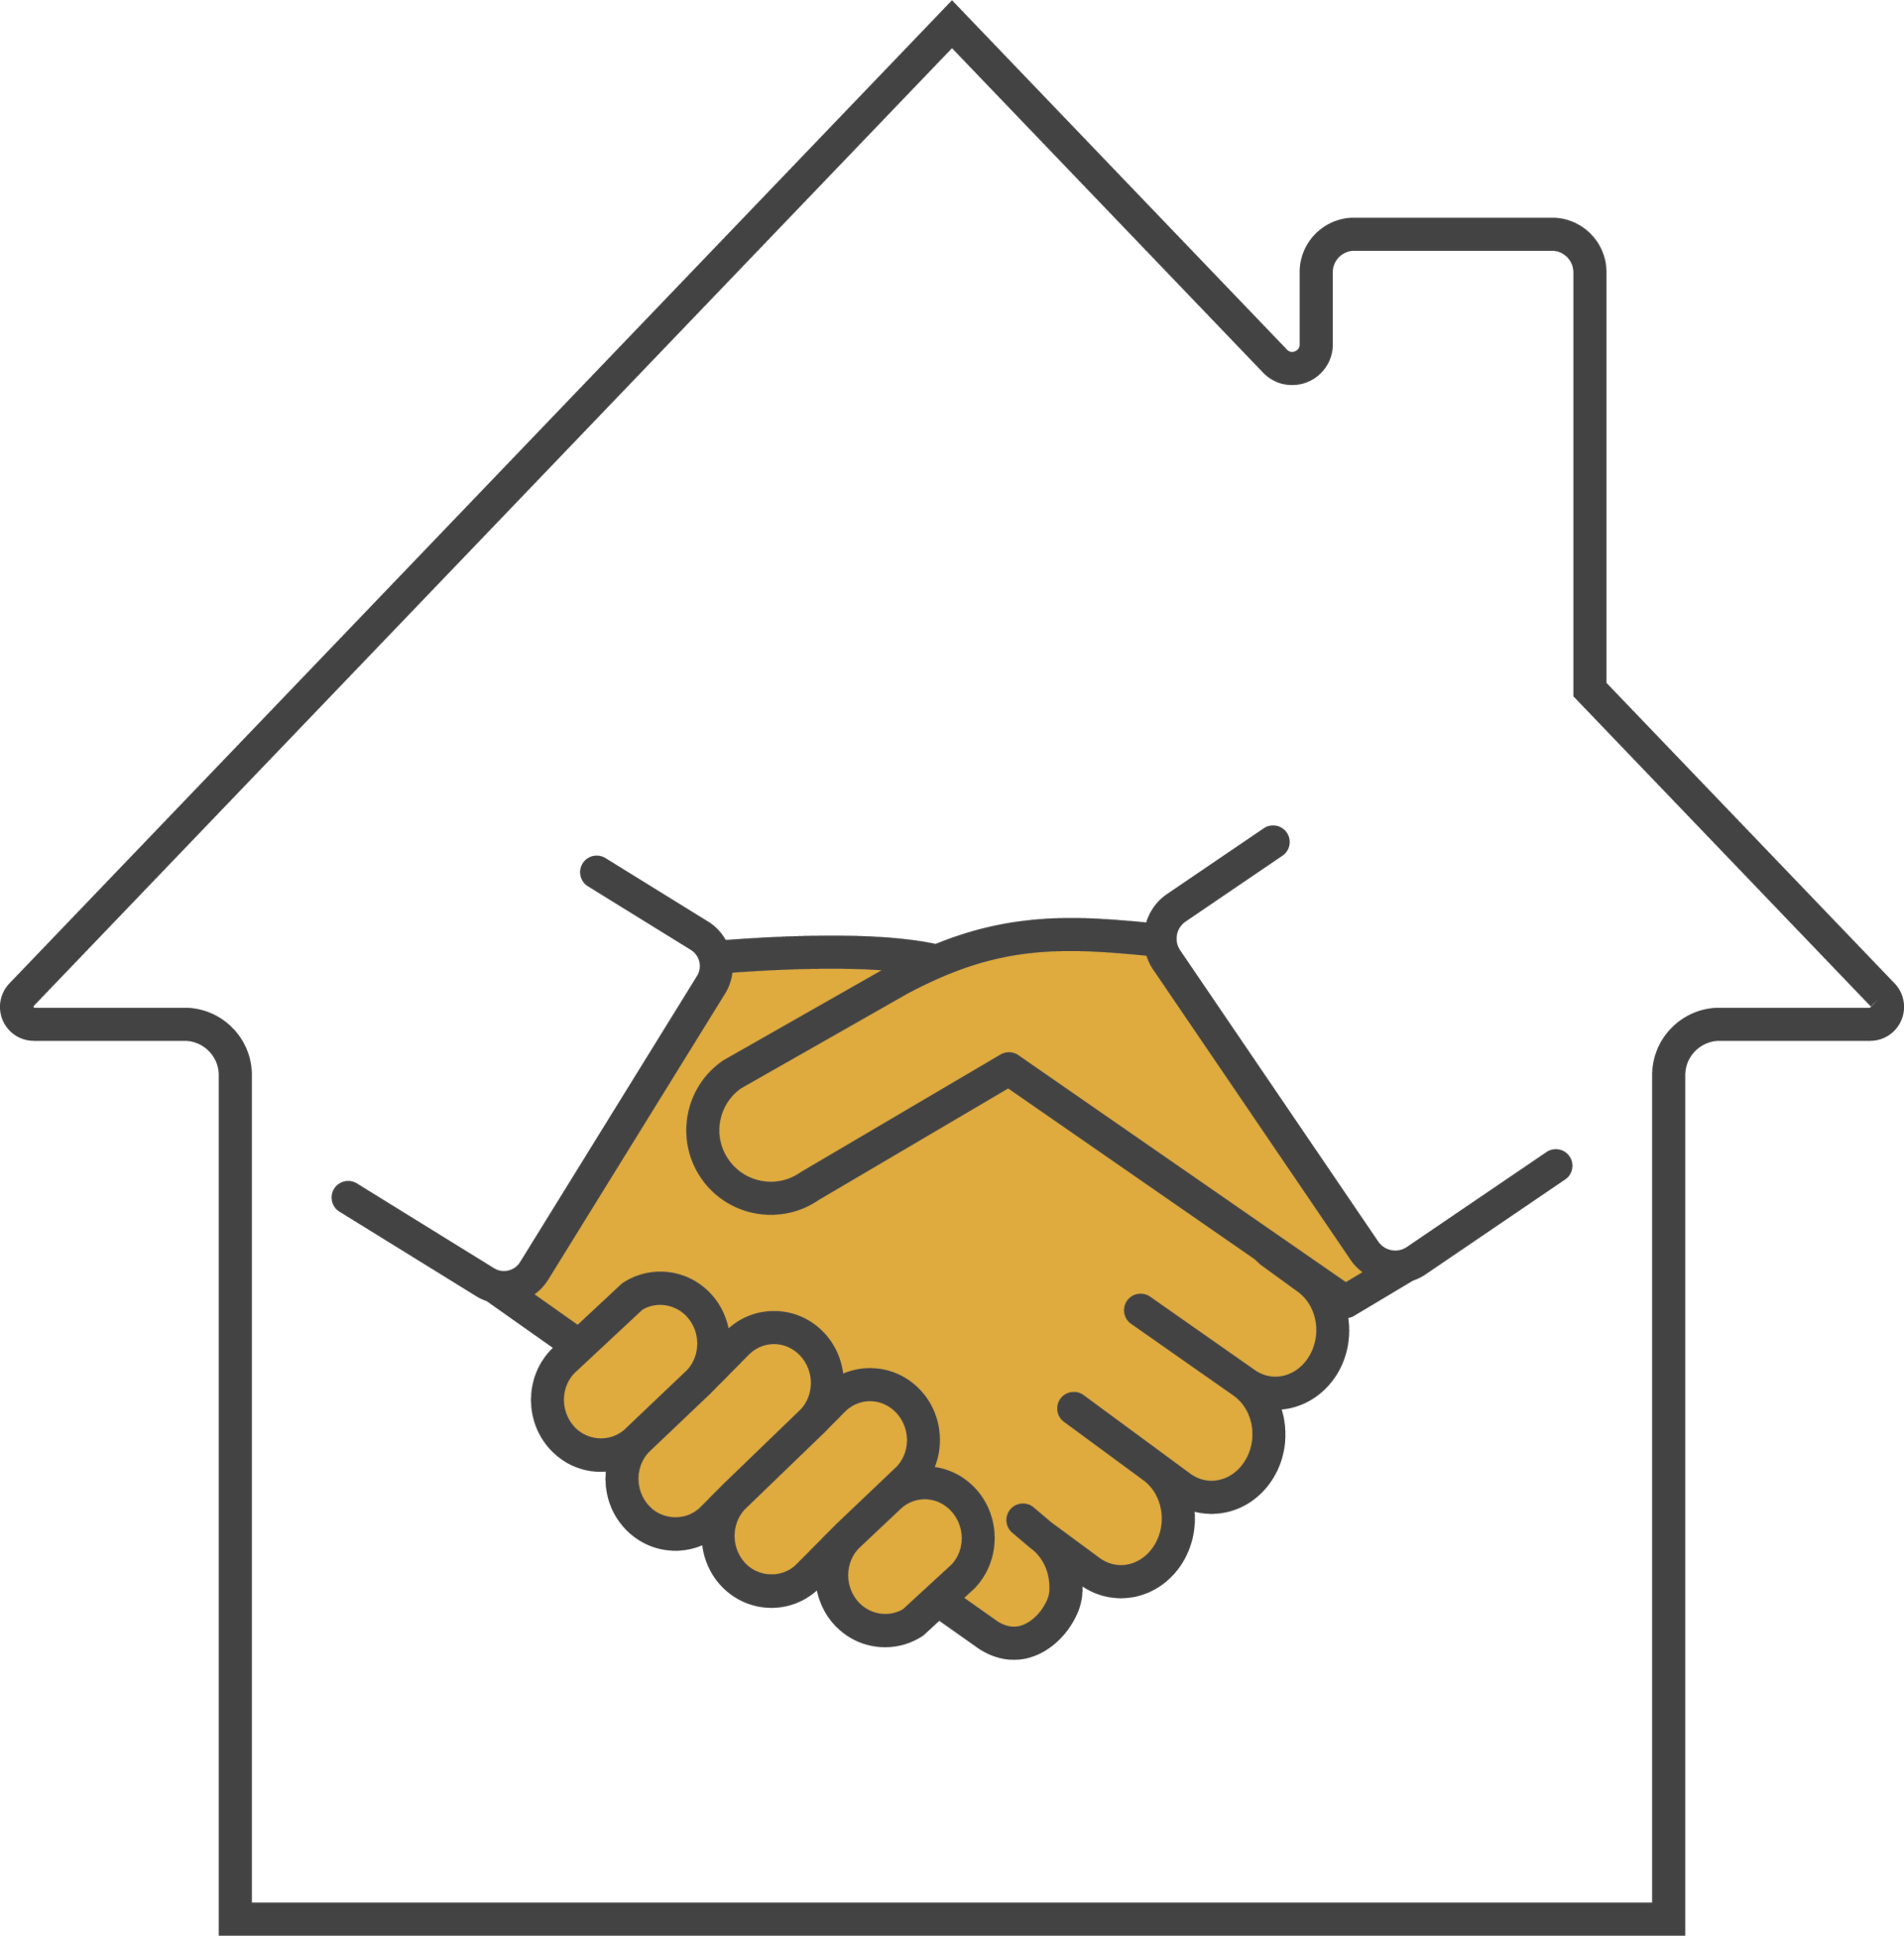 icon of a house with two shaking hands meeting in the middle